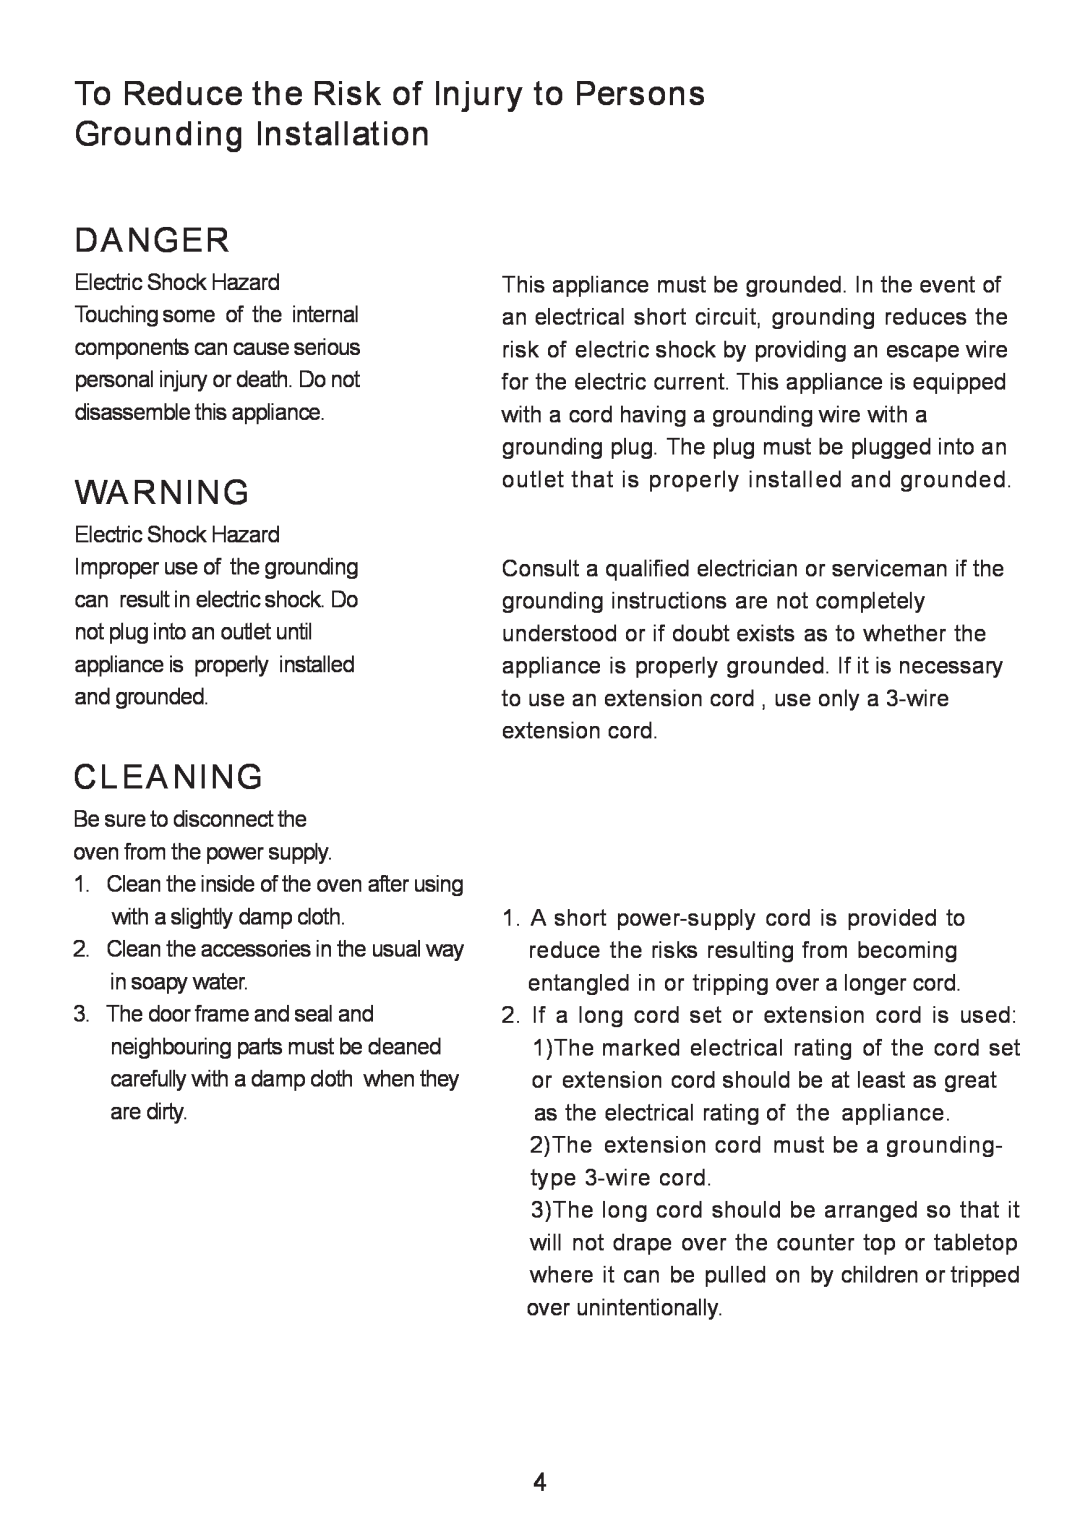 Sanyo em-c887B, UK2 instruction manual To Reduce the Risk of Injury to Persons Grounding Installation, Danger, Cleaning 